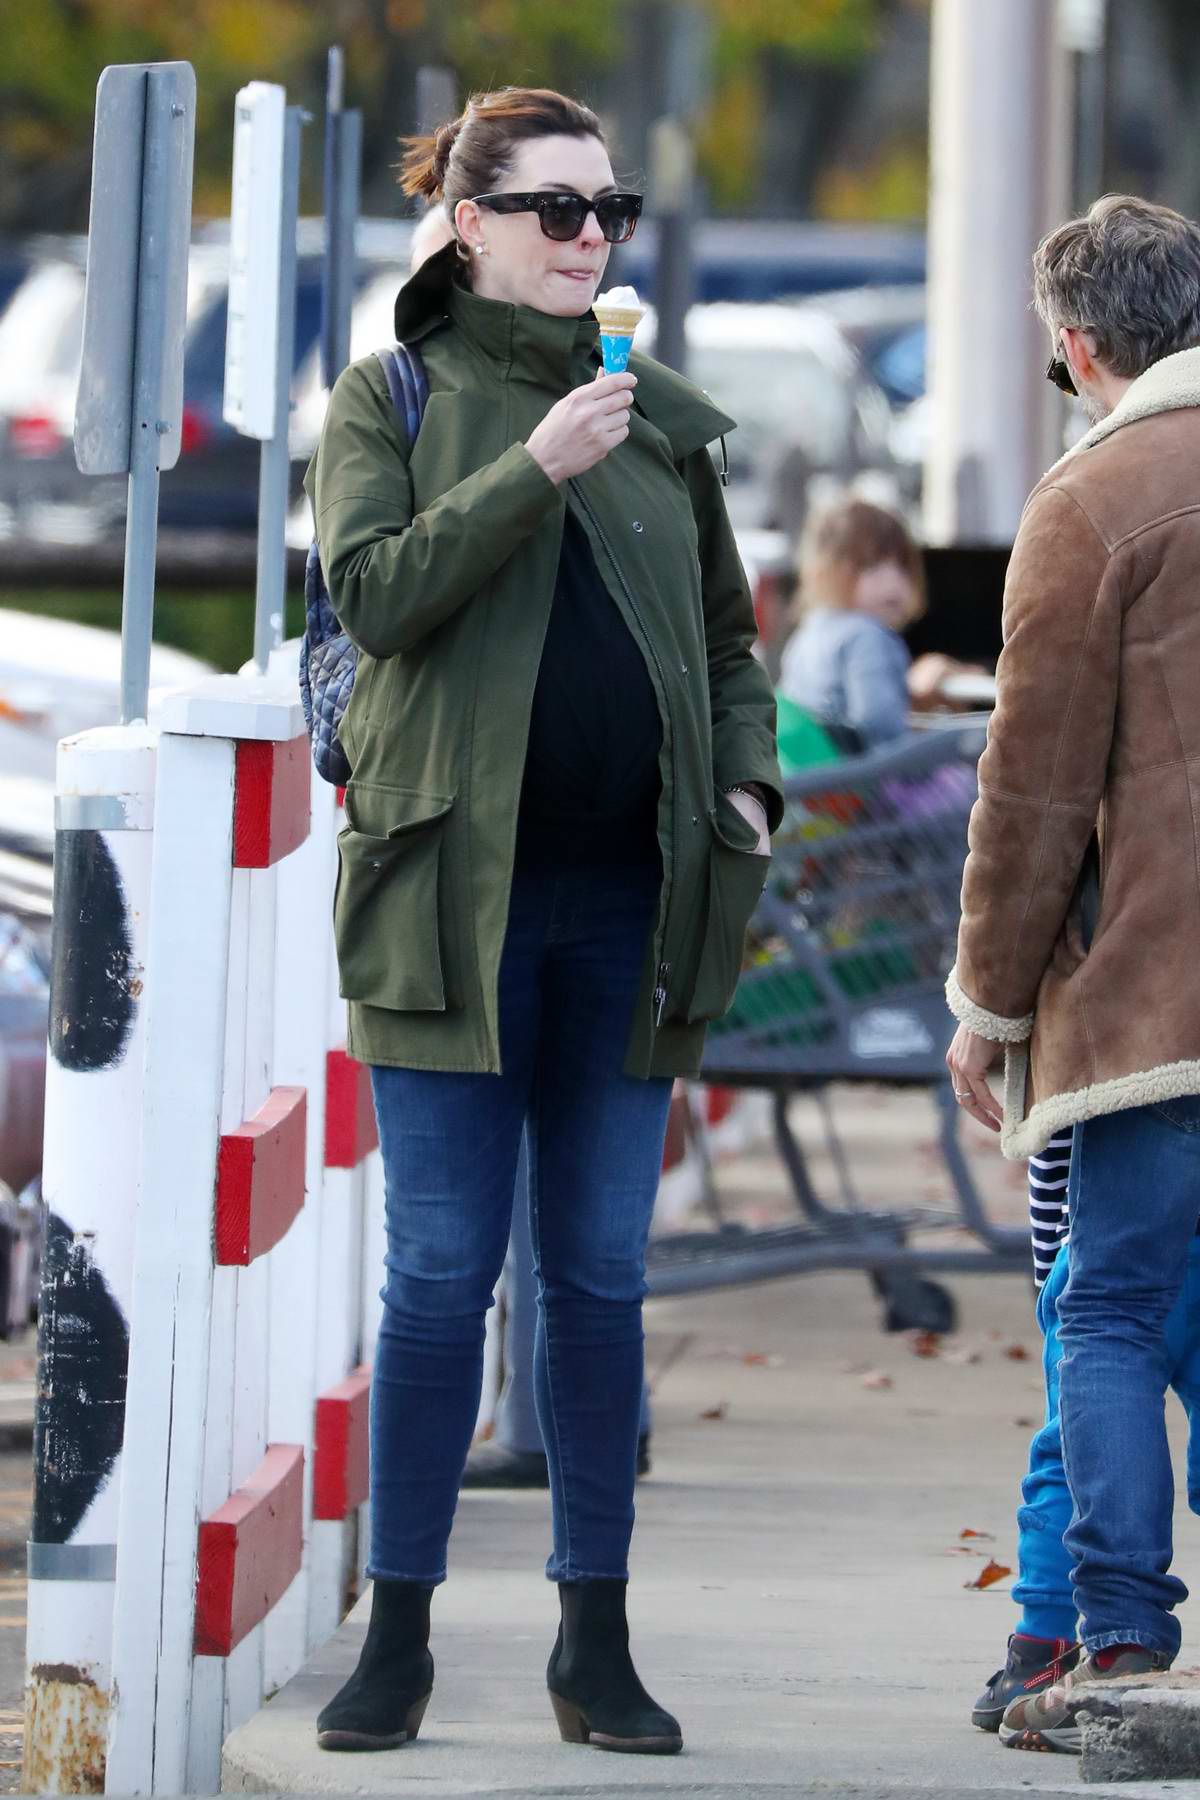 anne hathaway enjoys an ice cream cone while out with husband adam shulman  at stew leonard's supermarket in connecticut-061119_5